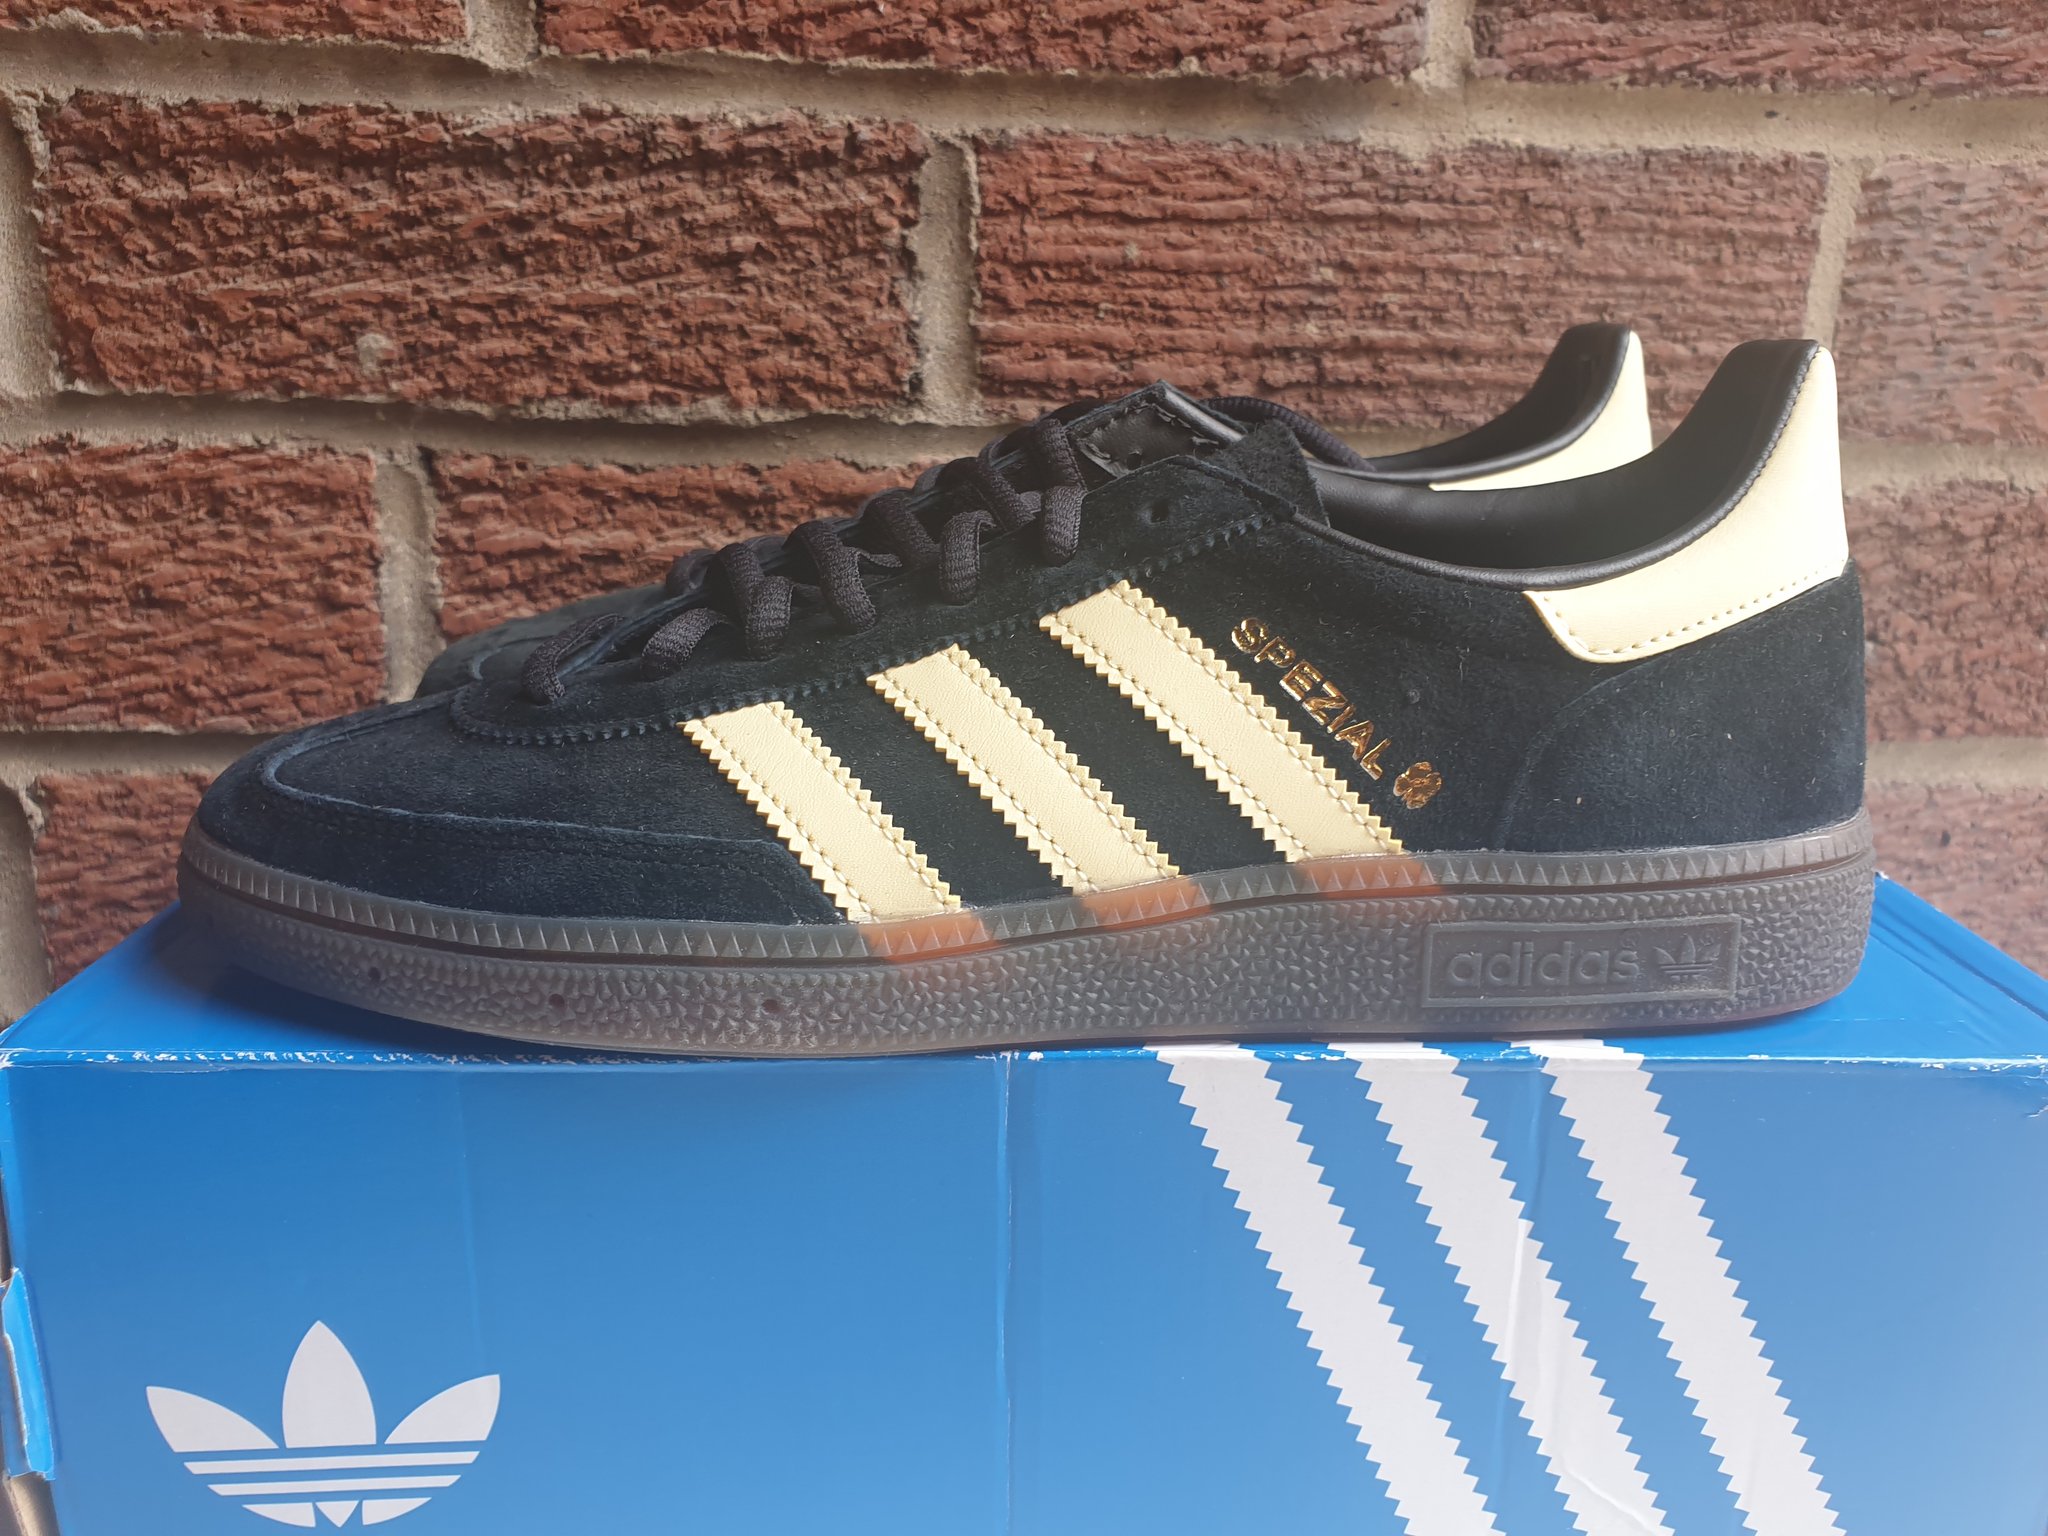 KGS Trainers on Twitter: "Adidas handball spzl St Patrick's day Guinness colour way Sizes 7 8 UK £80 delivered free UK postage #adidas #spzl # spezial #handball #guinness #trainers #sneakers #casual #mens #